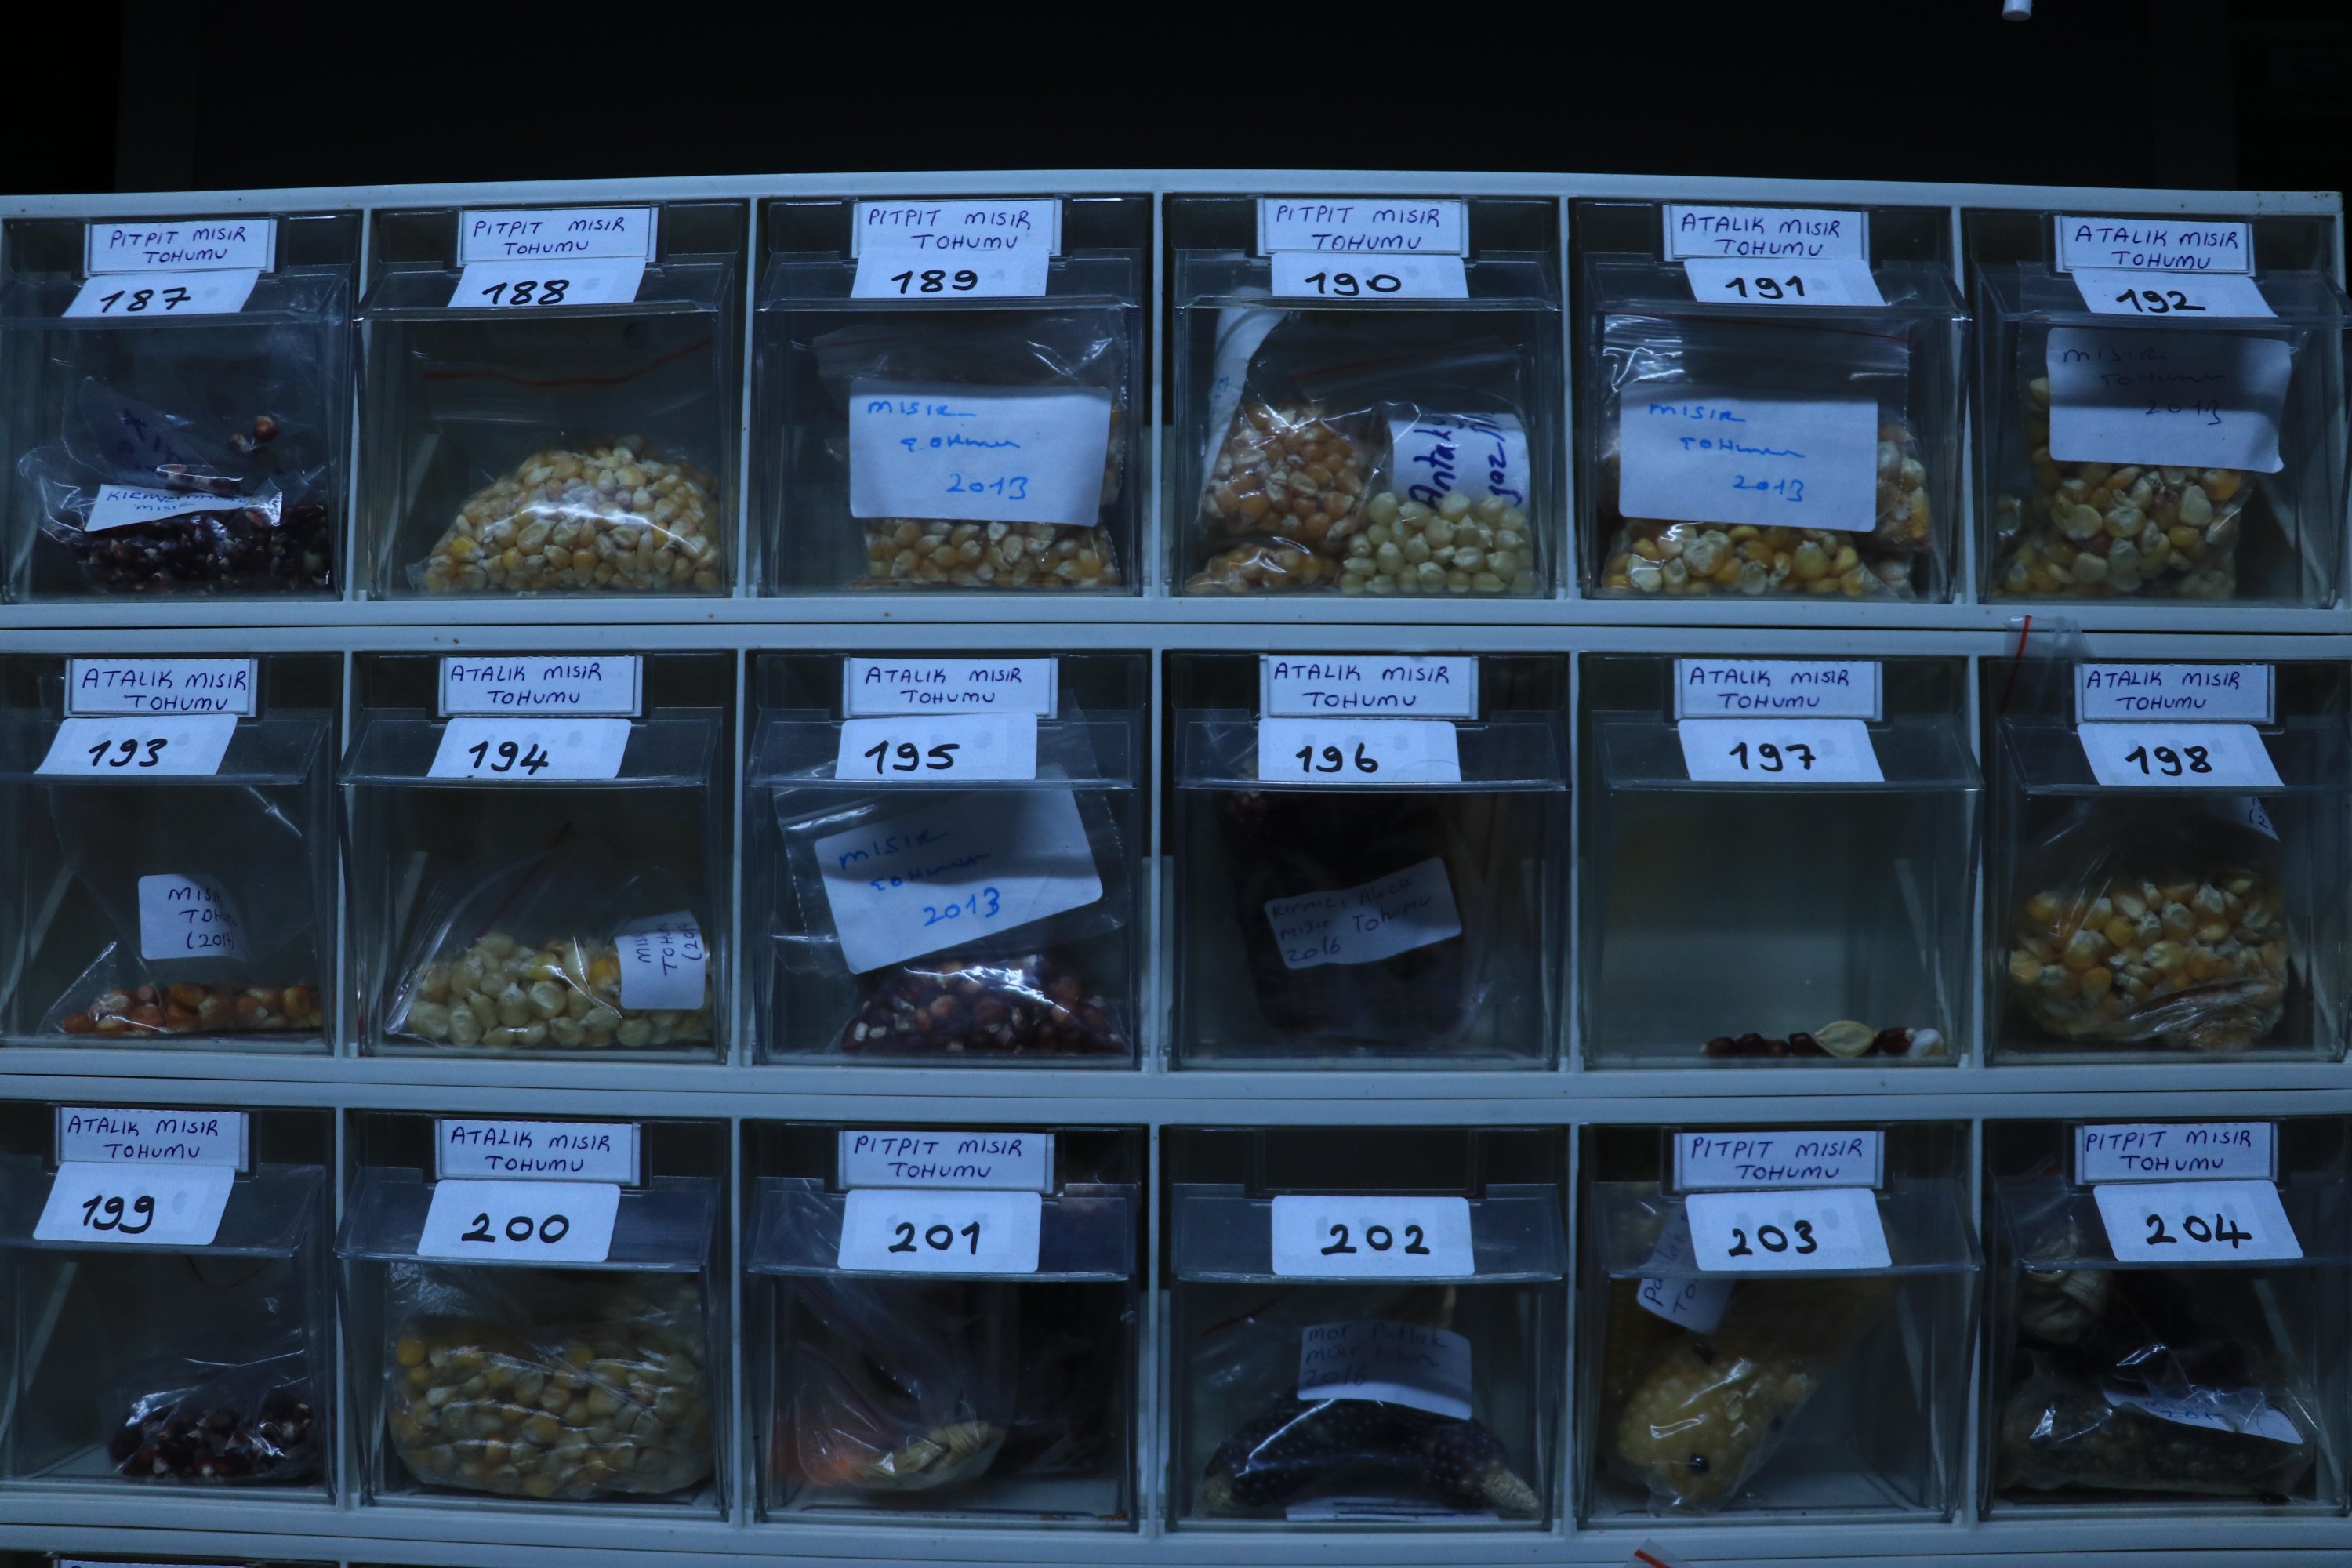 Every seed is coded and divided into its own compartment where it is kept at a stable temperature year-round. (AA Photo)